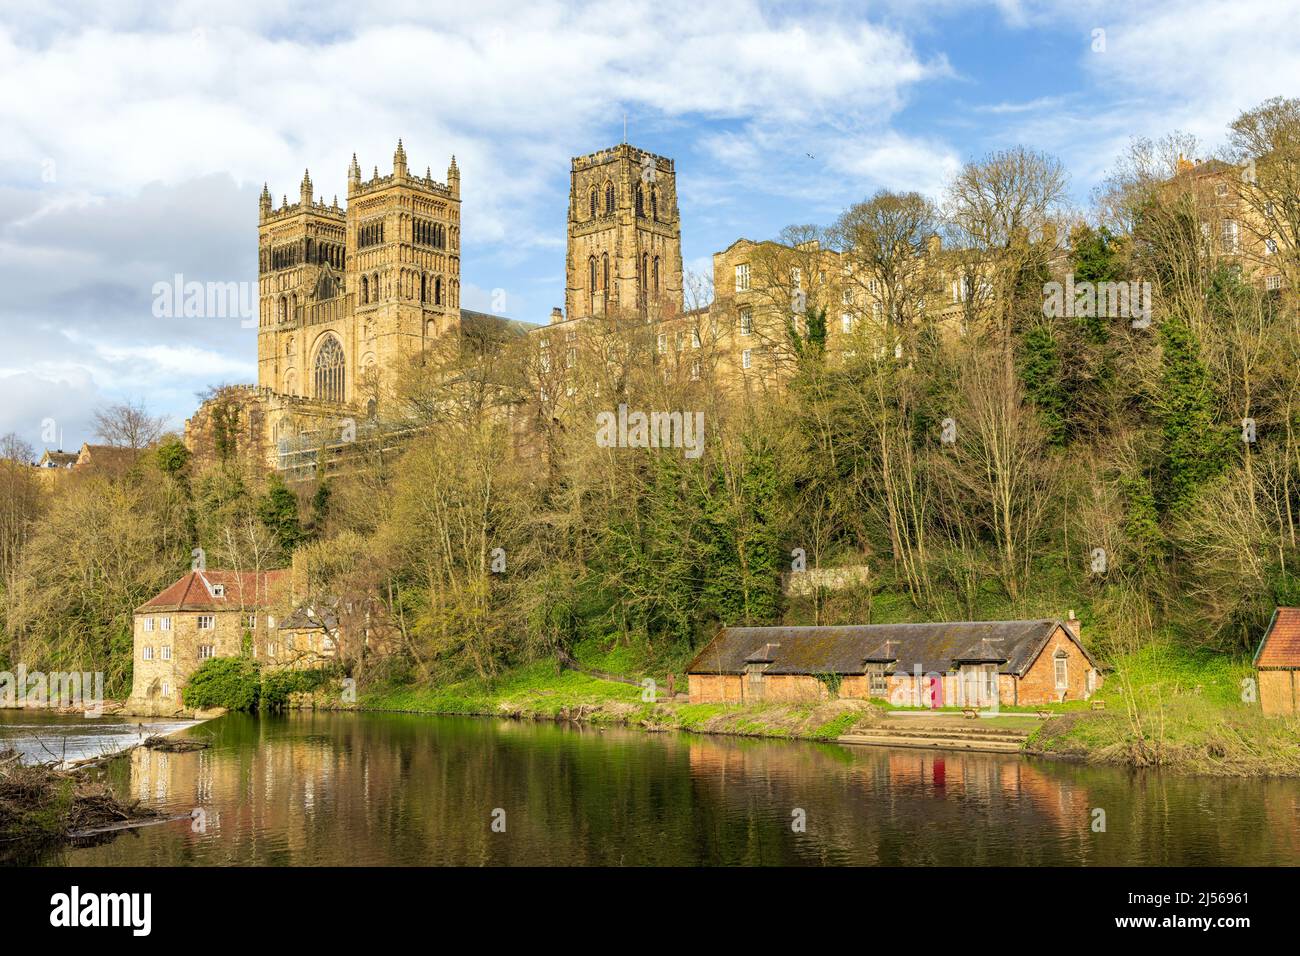 The magnificent Durham Cathedral, viewed over the River Wear in the city of Durham. Taken on a bright spring day. Stock Photo